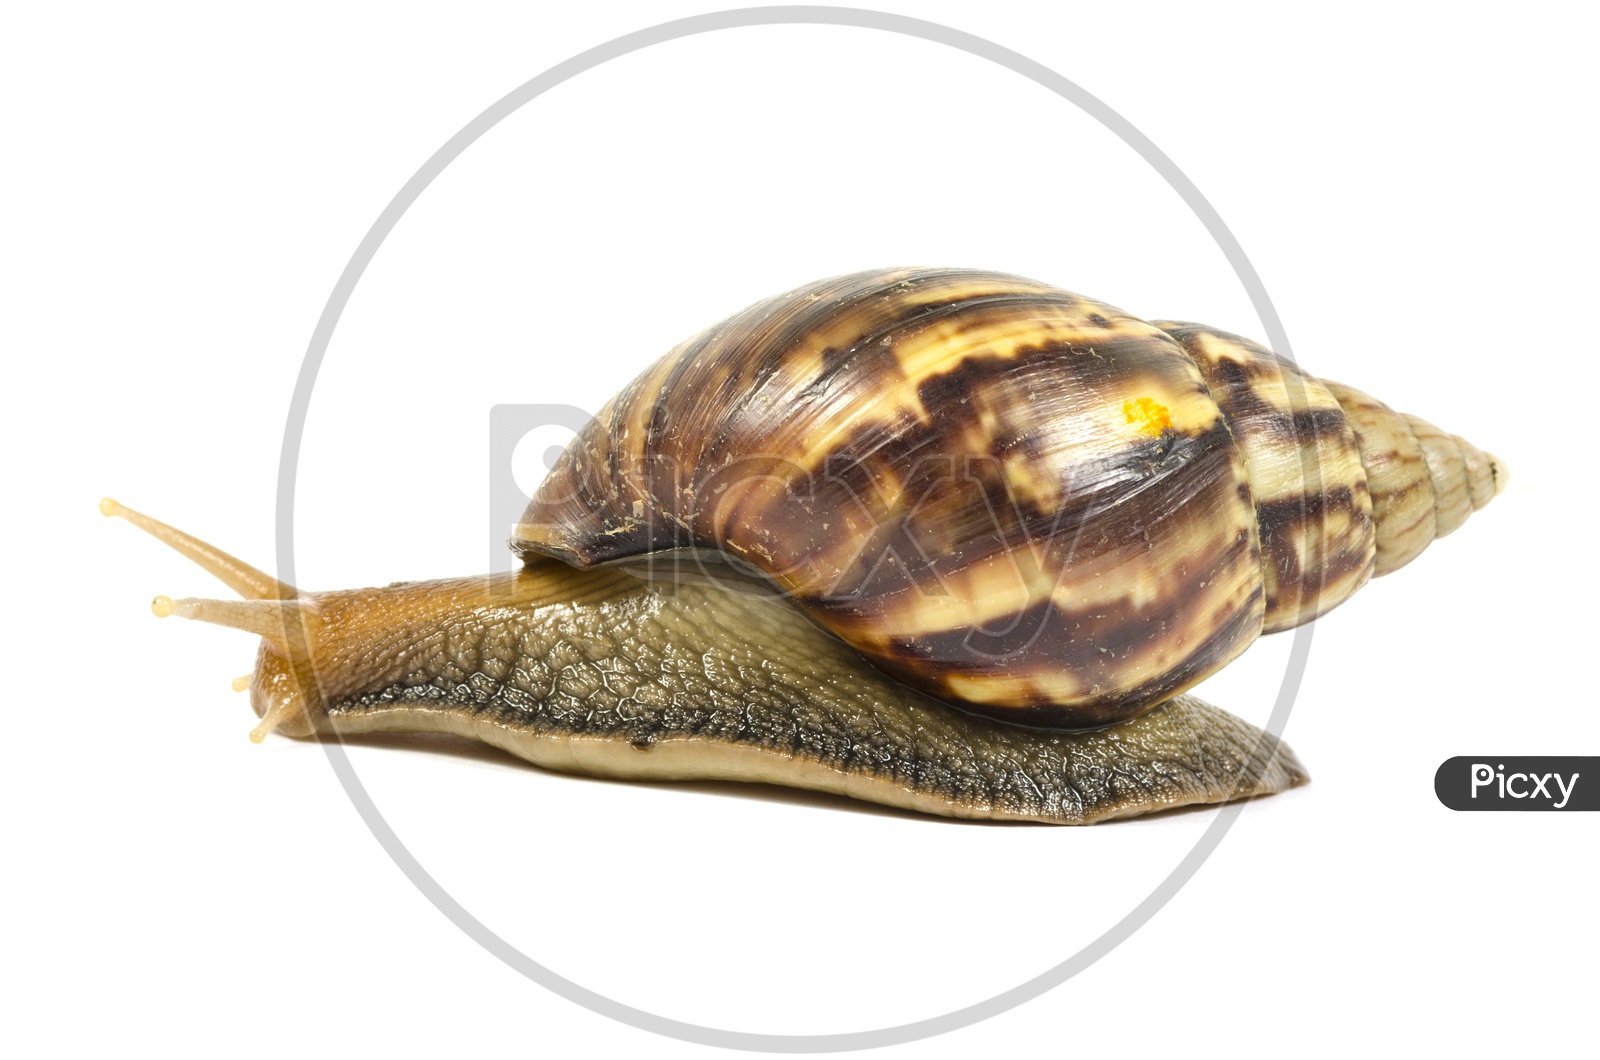 Garden snail or Giant African Snail On an isolated White Background